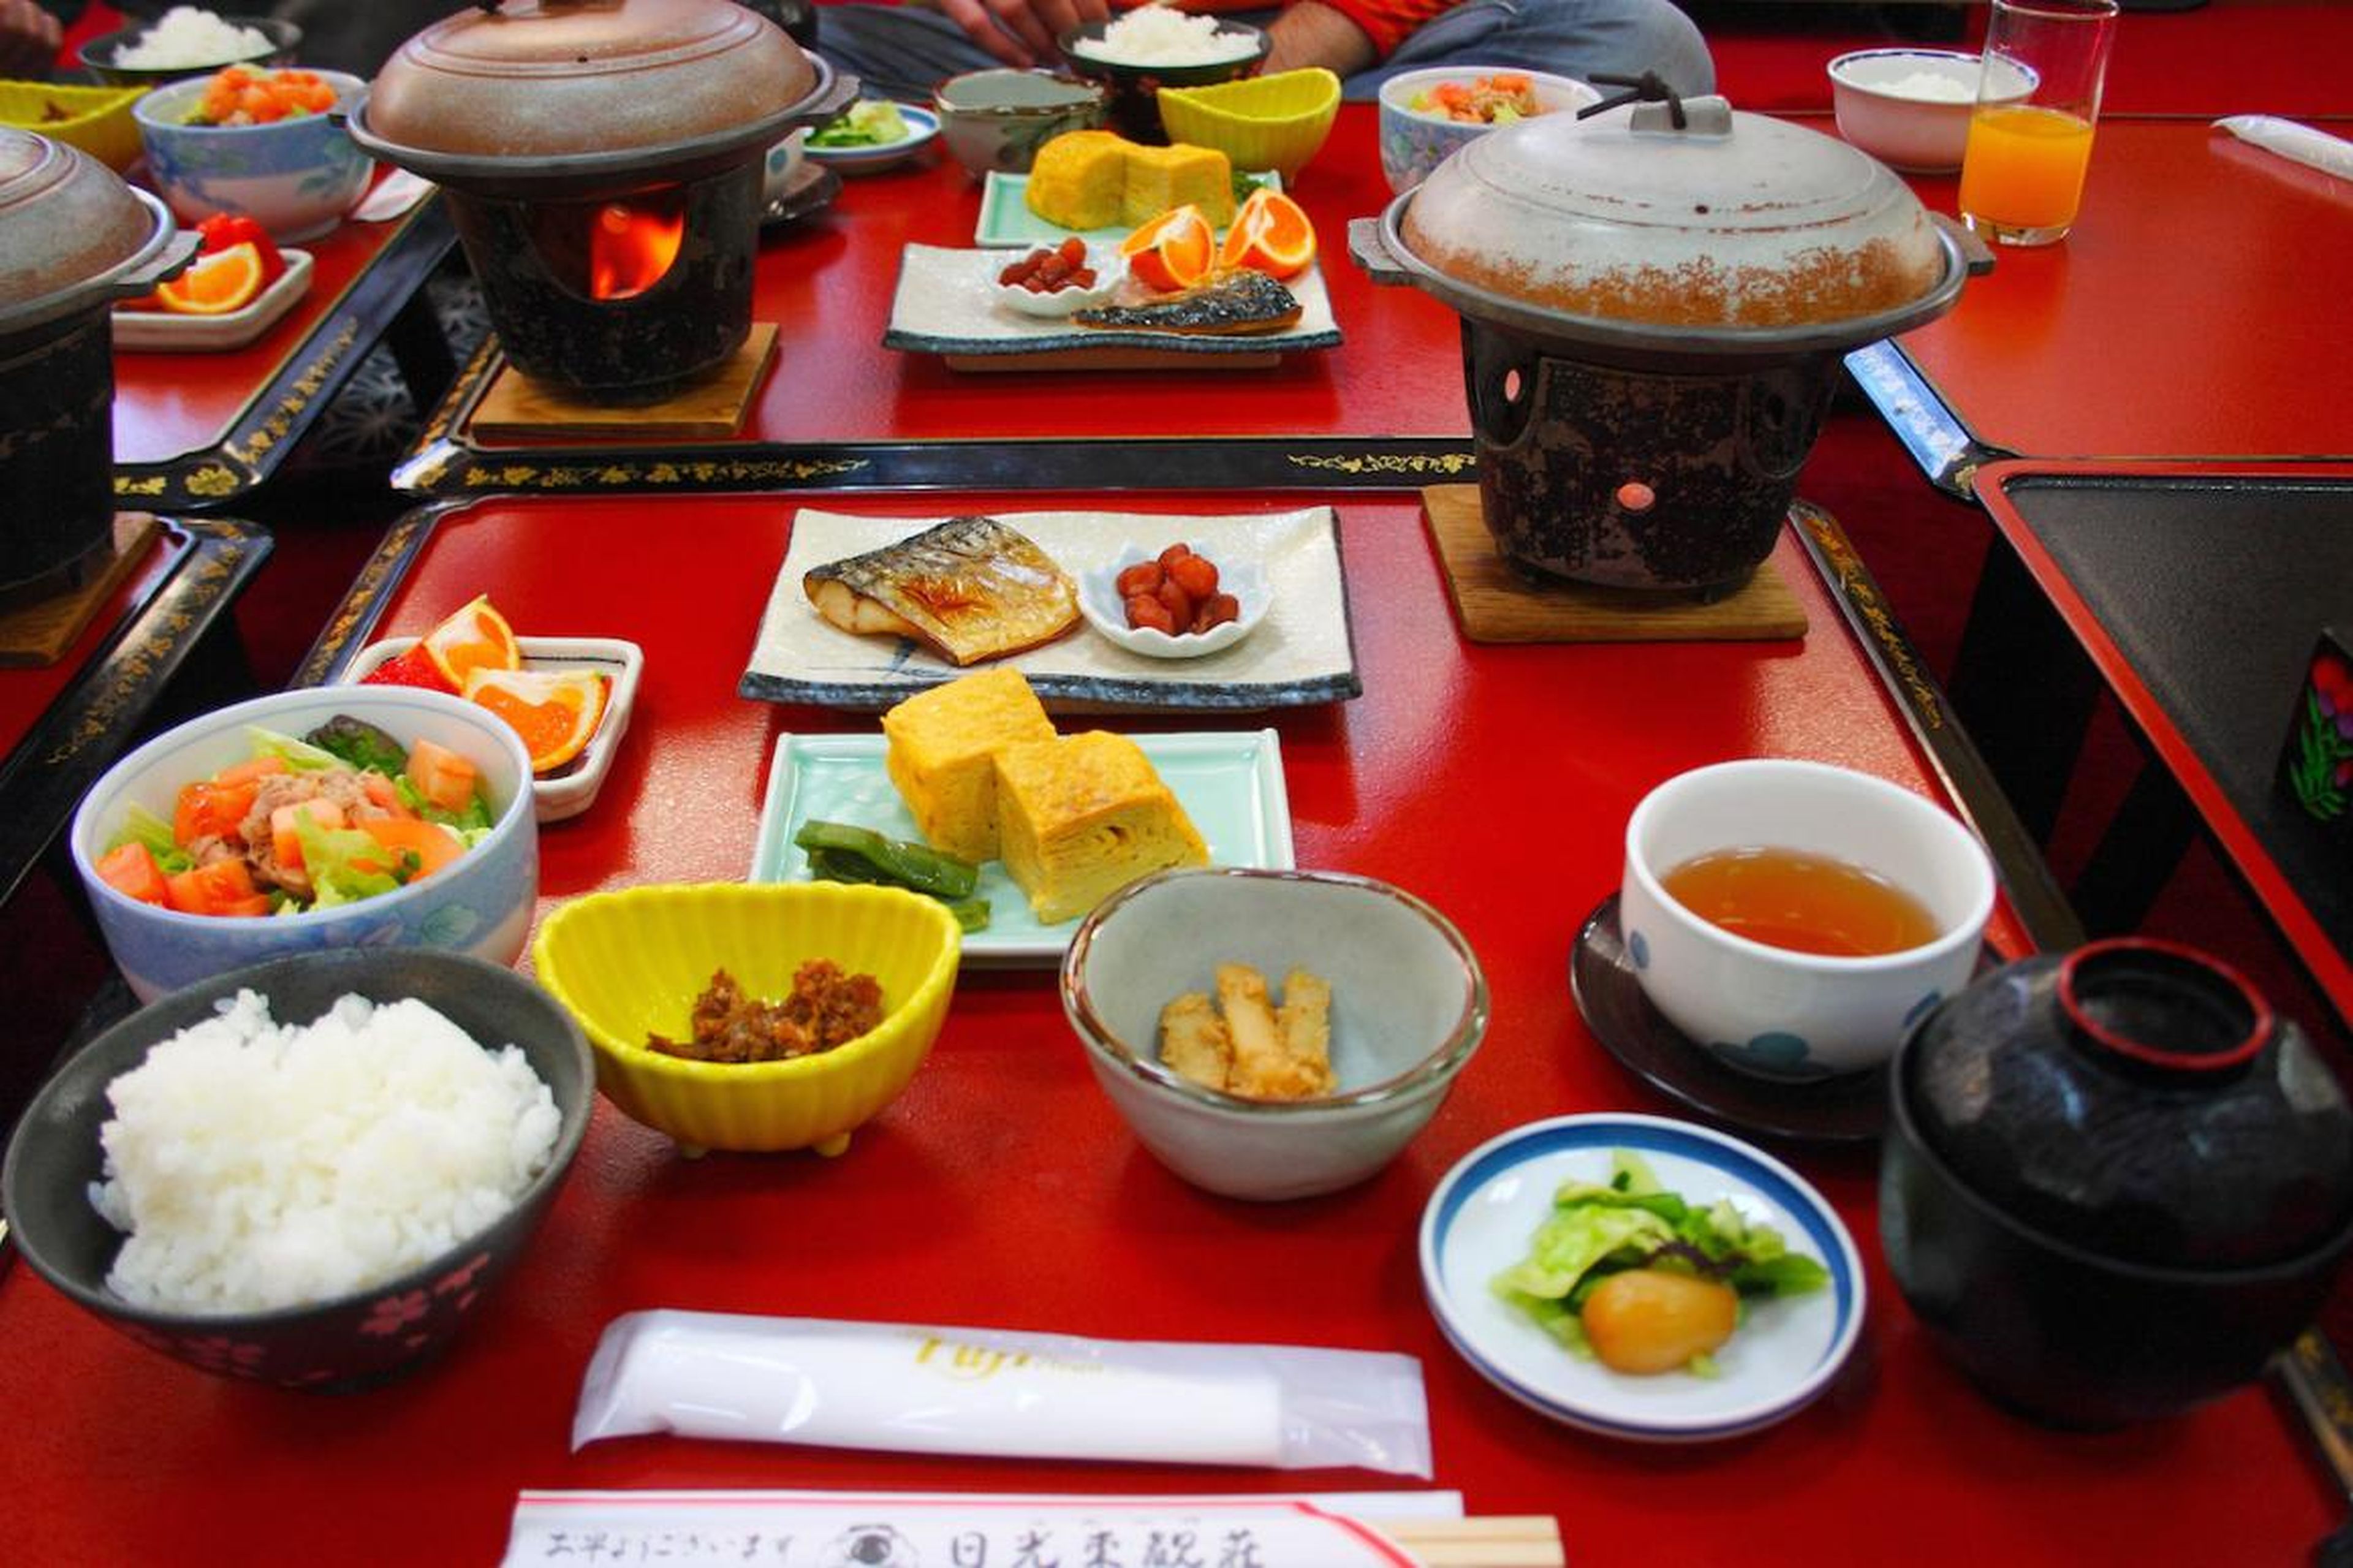 Some Japanese people abide by a Confucian teaching called "hara hachi bu," which means they eat until their belly is 80% full, not 100%.